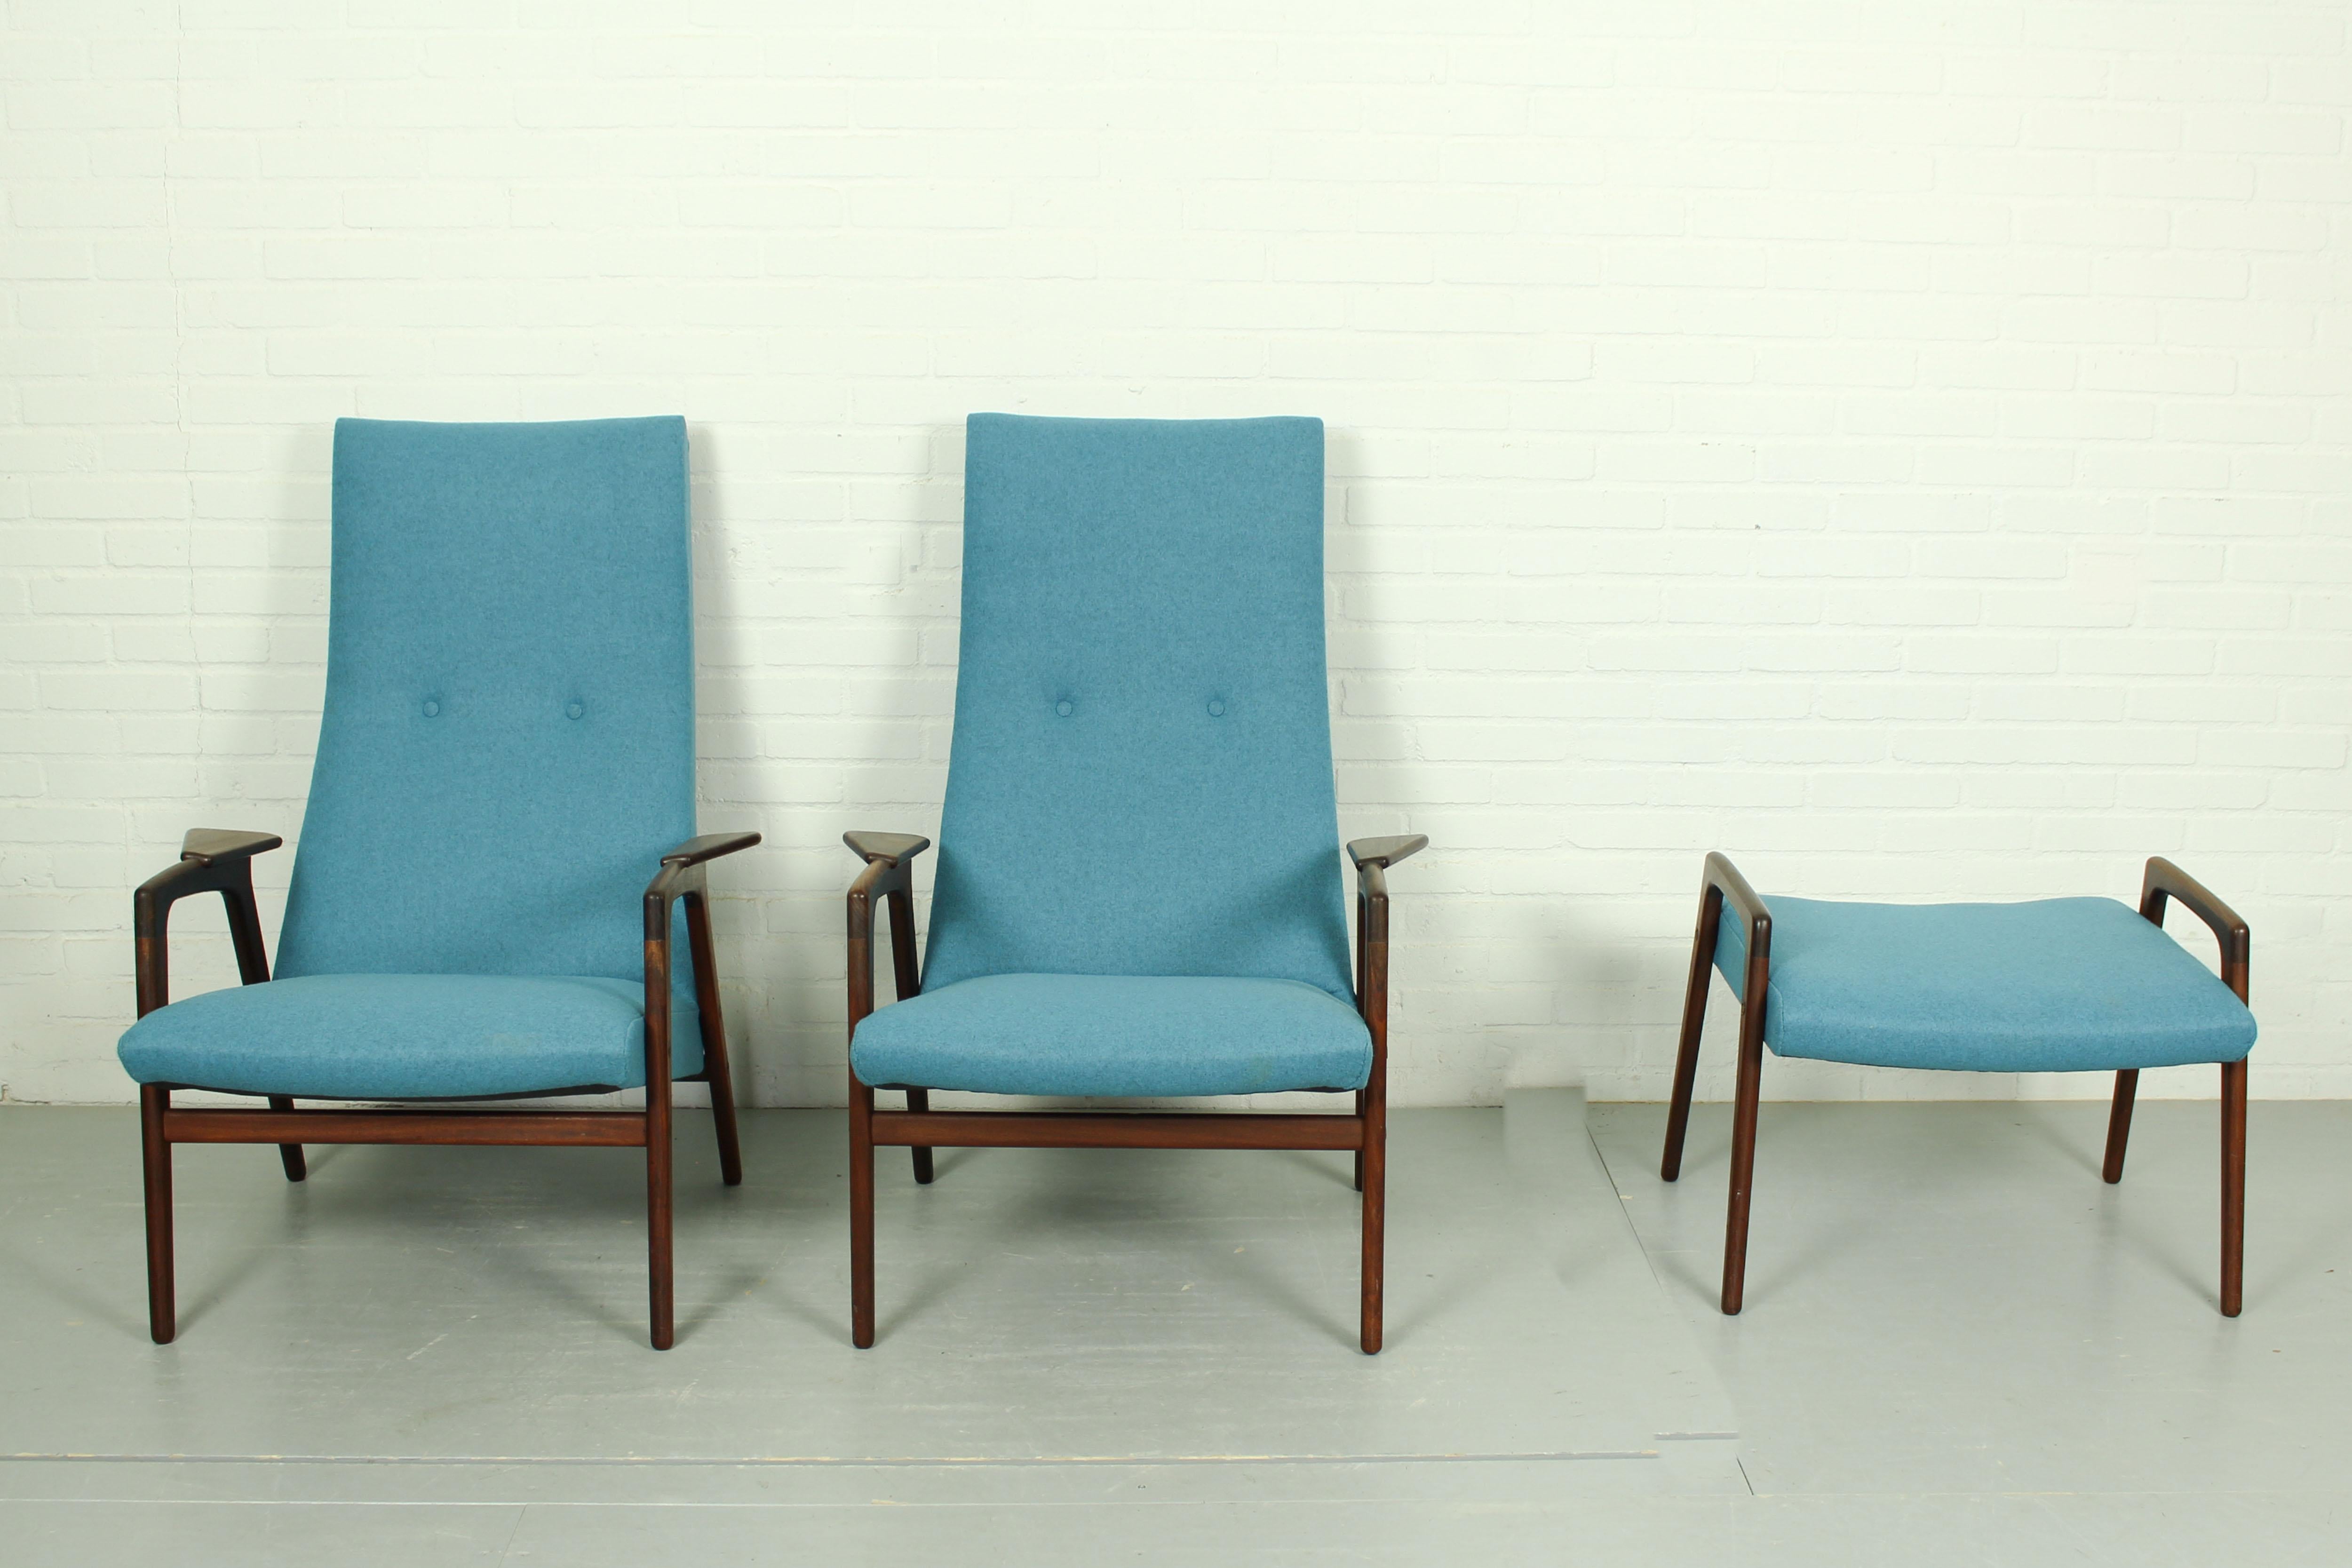 This set of 2 danish lounge chairs with matching ottoman was designed by Swedish designer Yngve Ekström and manufactured by Pastoe in the 1960s. The items have been reupholstered in a beautiful blue melange woolfelt and the frame has been expertly